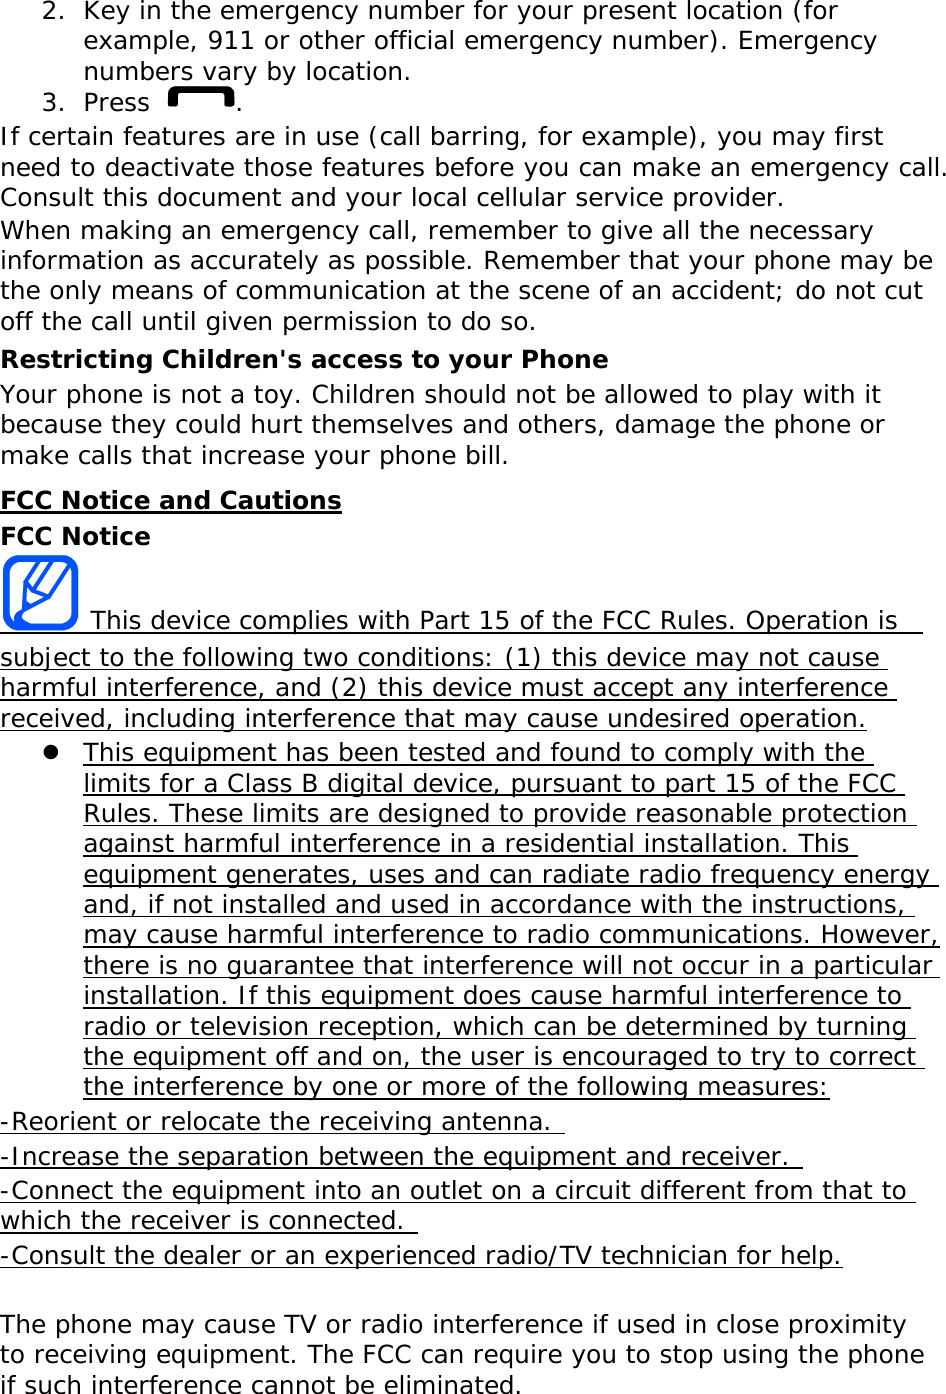 2. Key in the emergency number for your present location (for example, 911 or other official emergency number). Emergency numbers vary by location. 3. Press . If certain features are in use (call barring, for example), you may first need to deactivate those features before you can make an emergency call. Consult this document and your local cellular service provider. When making an emergency call, remember to give all the necessary information as accurately as possible. Remember that your phone may be the only means of communication at the scene of an accident; do not cut off the call until given permission to do so. Restricting Children&apos;s access to your Phone Your phone is not a toy. Children should not be allowed to play with it because they could hurt themselves and others, damage the phone or make calls that increase your phone bill. FCC Notice and Cautions FCC Notice  This device complies with Part 15 of the FCC Rules. Operation is  subject to the following two conditions: (1) this device may not cause harmful interference, and (2) this device must accept any interference received, including interference that may cause undesired operation.  This equipment has been tested and found to comply with the limits for a Class B digital device, pursuant to part 15 of the FCC Rules. These limits are designed to provide reasonable protection against harmful interference in a residential installation. This equipment generates, uses and can radiate radio frequency energy and, if not installed and used in accordance with the instructions, may cause harmful interference to radio communications. However, there is no guarantee that interference will not occur in a particular installation. If this equipment does cause harmful interference to radio or television reception, which can be determined by turning the equipment off and on, the user is encouraged to try to correct the interference by one or more of the following measures: -Reorient or relocate the receiving antenna.  -Increase the separation between the equipment and receiver.  -Connect the equipment into an outlet on a circuit different from that to which the receiver is connected.  -Consult the dealer or an experienced radio/TV technician for help.  The phone may cause TV or radio interference if used in close proximity to receiving equipment. The FCC can require you to stop using the phone if such interference cannot be eliminated. 